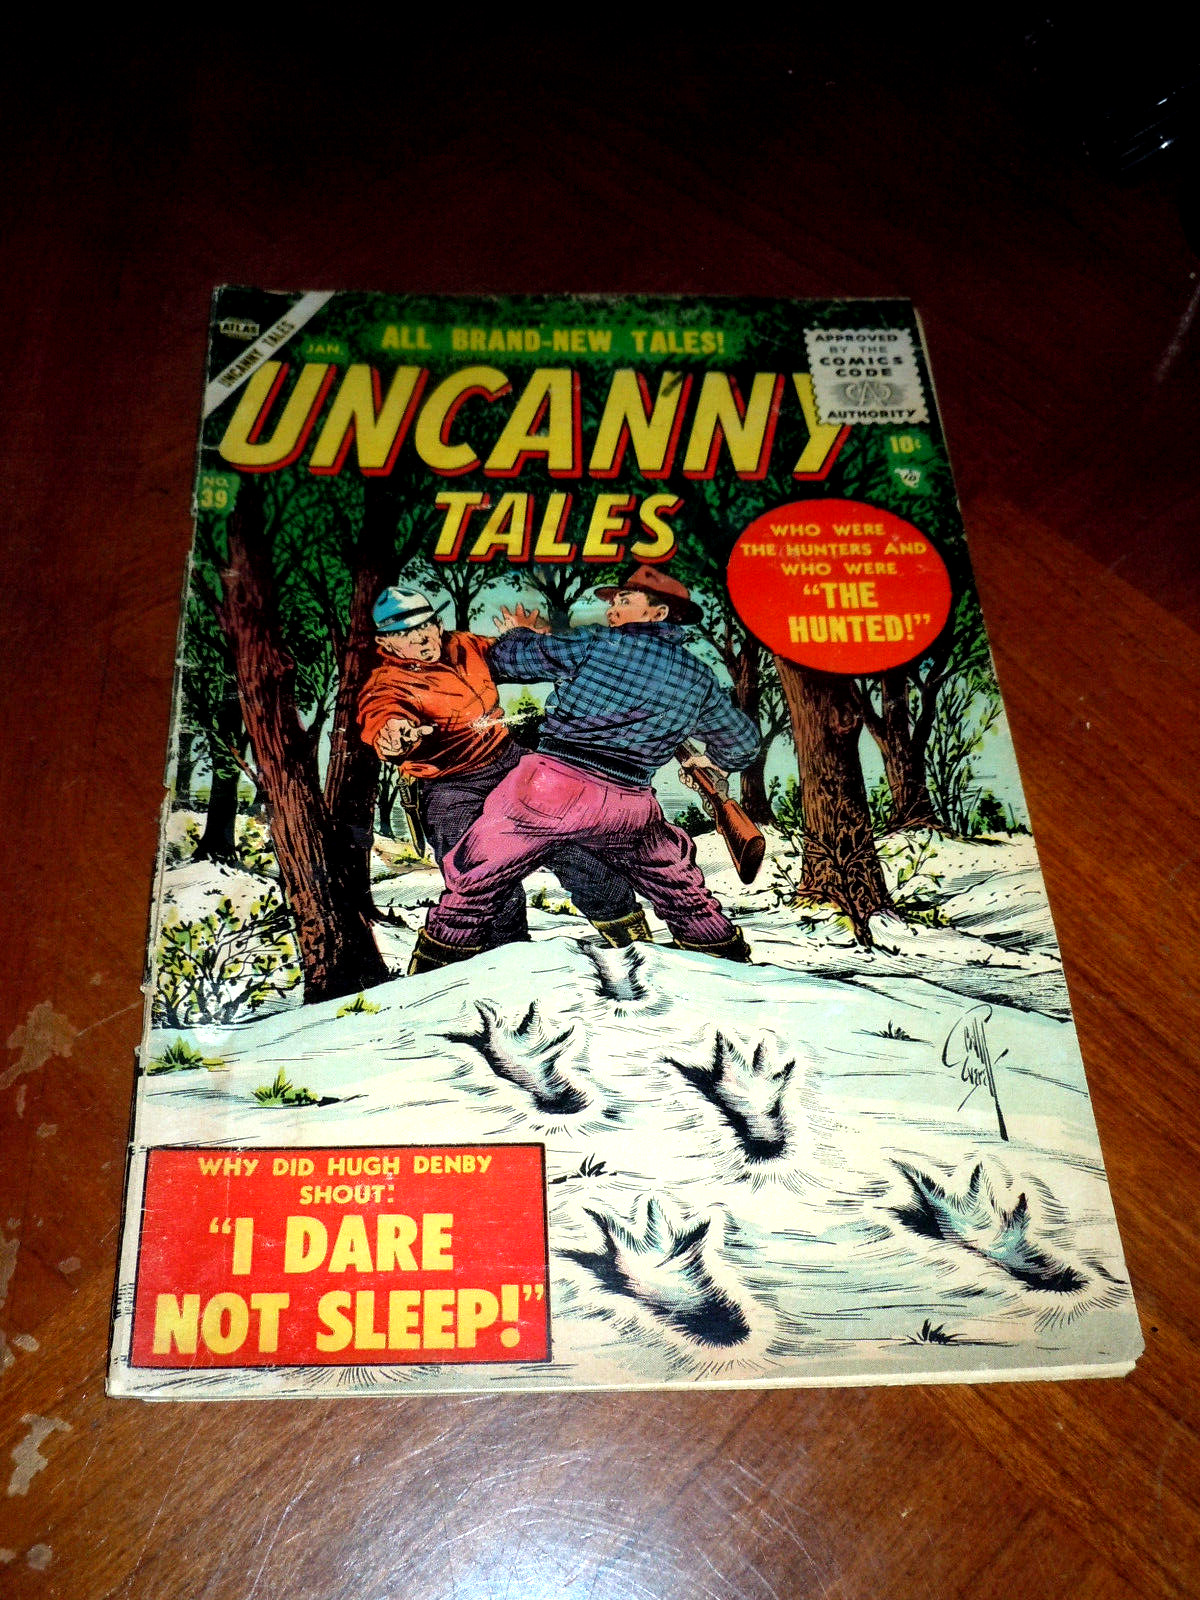 UNCANNY TALES #39 (ATLAS 1956) VG- (3.5) cond.  BILL EVERETT cover and story